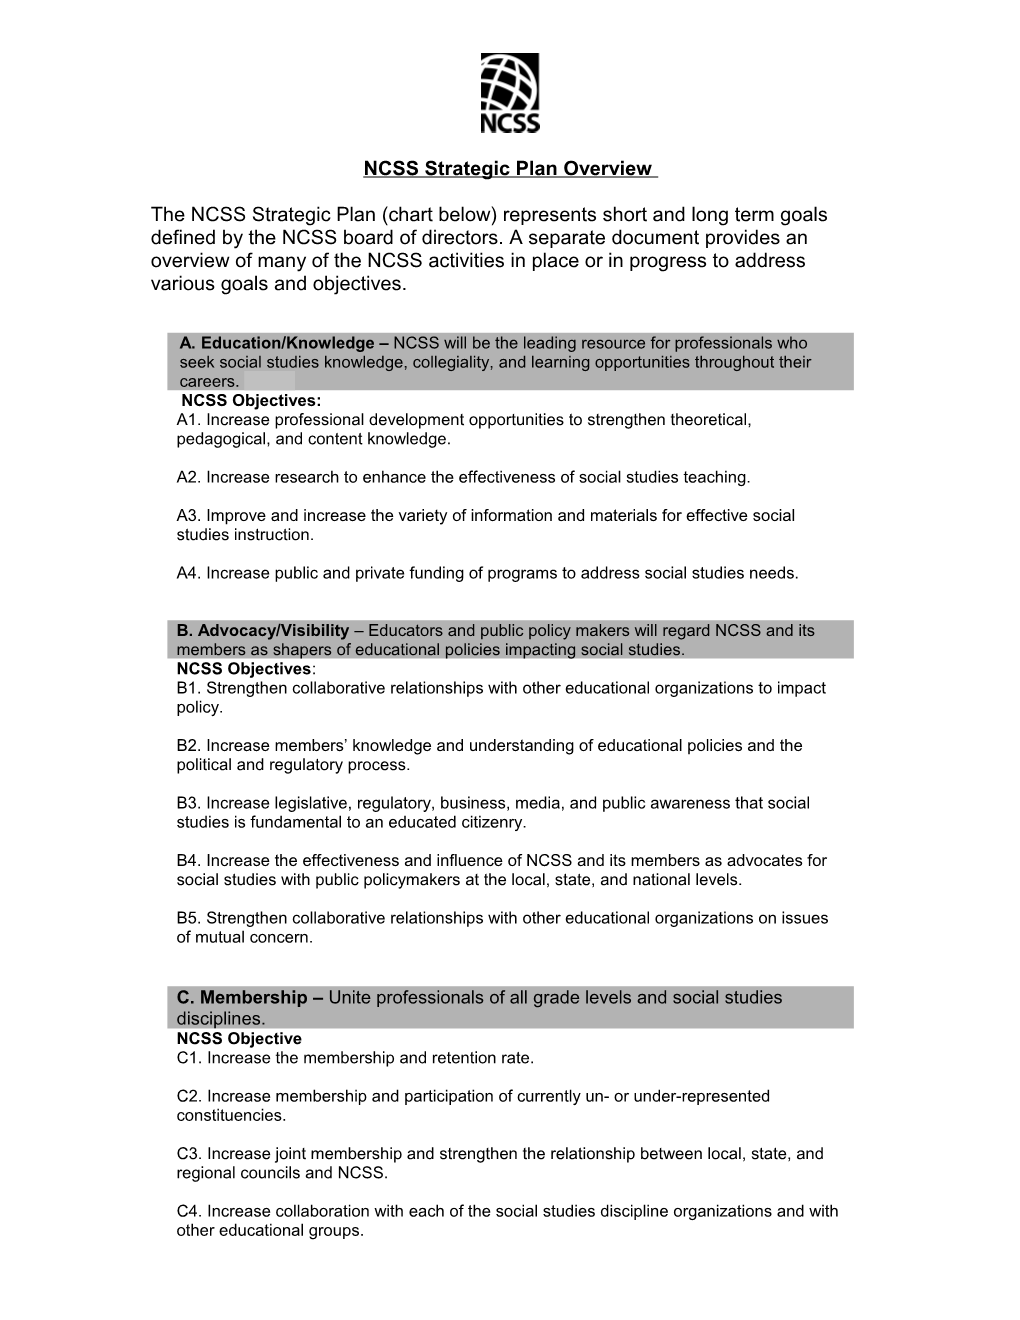 Overview of NCSS Strategic Plan and 2008-09 Priorities